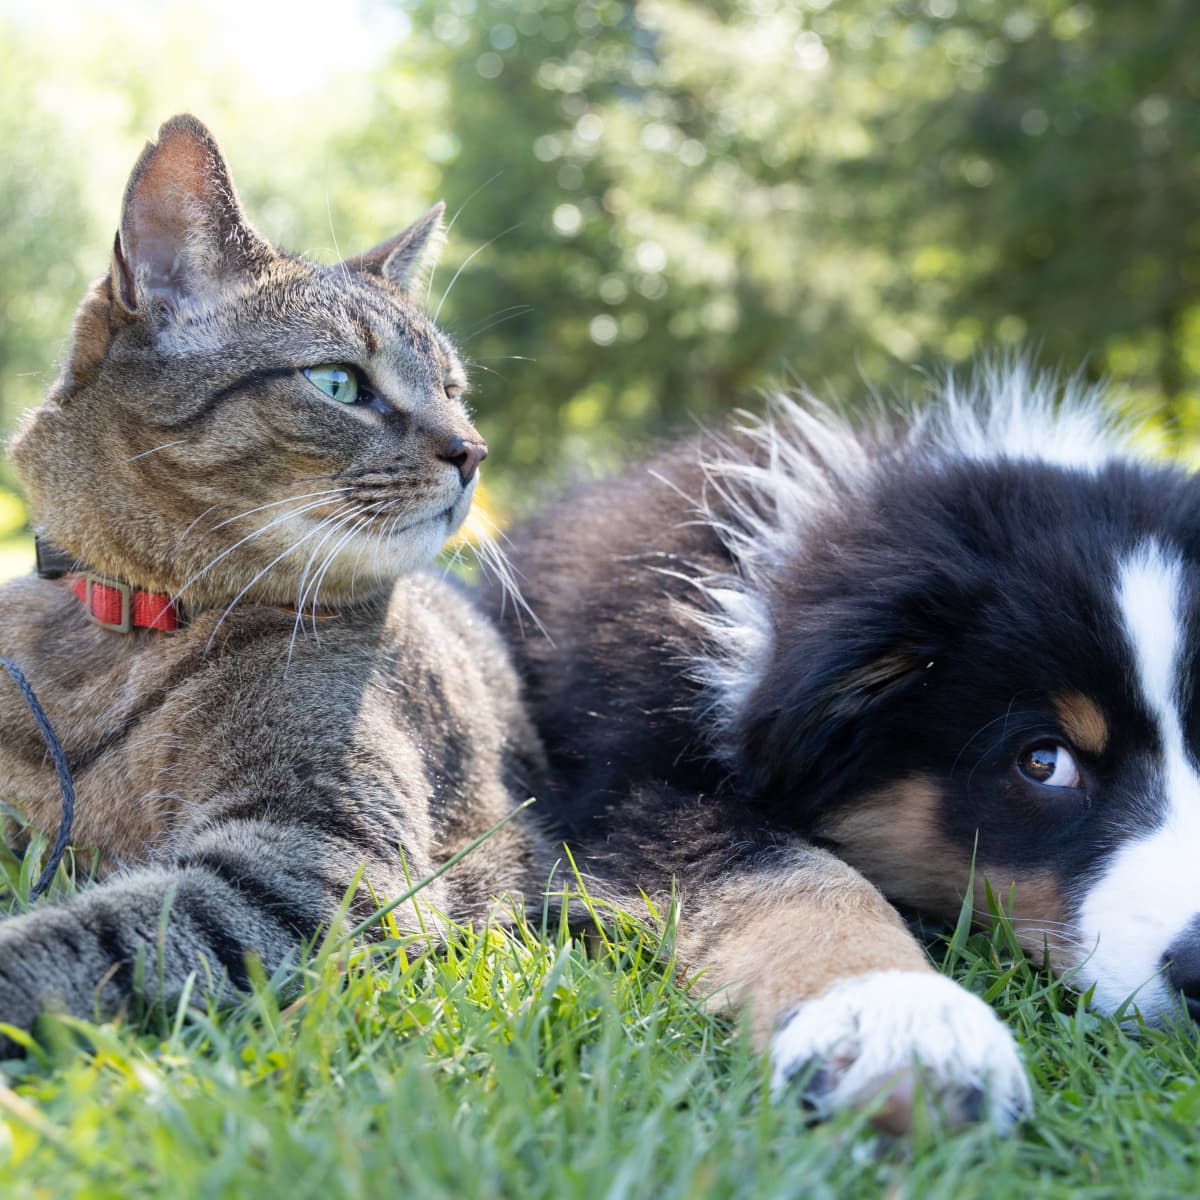 5 Dog Breeds That Like And Are Good With Cats - Pethelpful